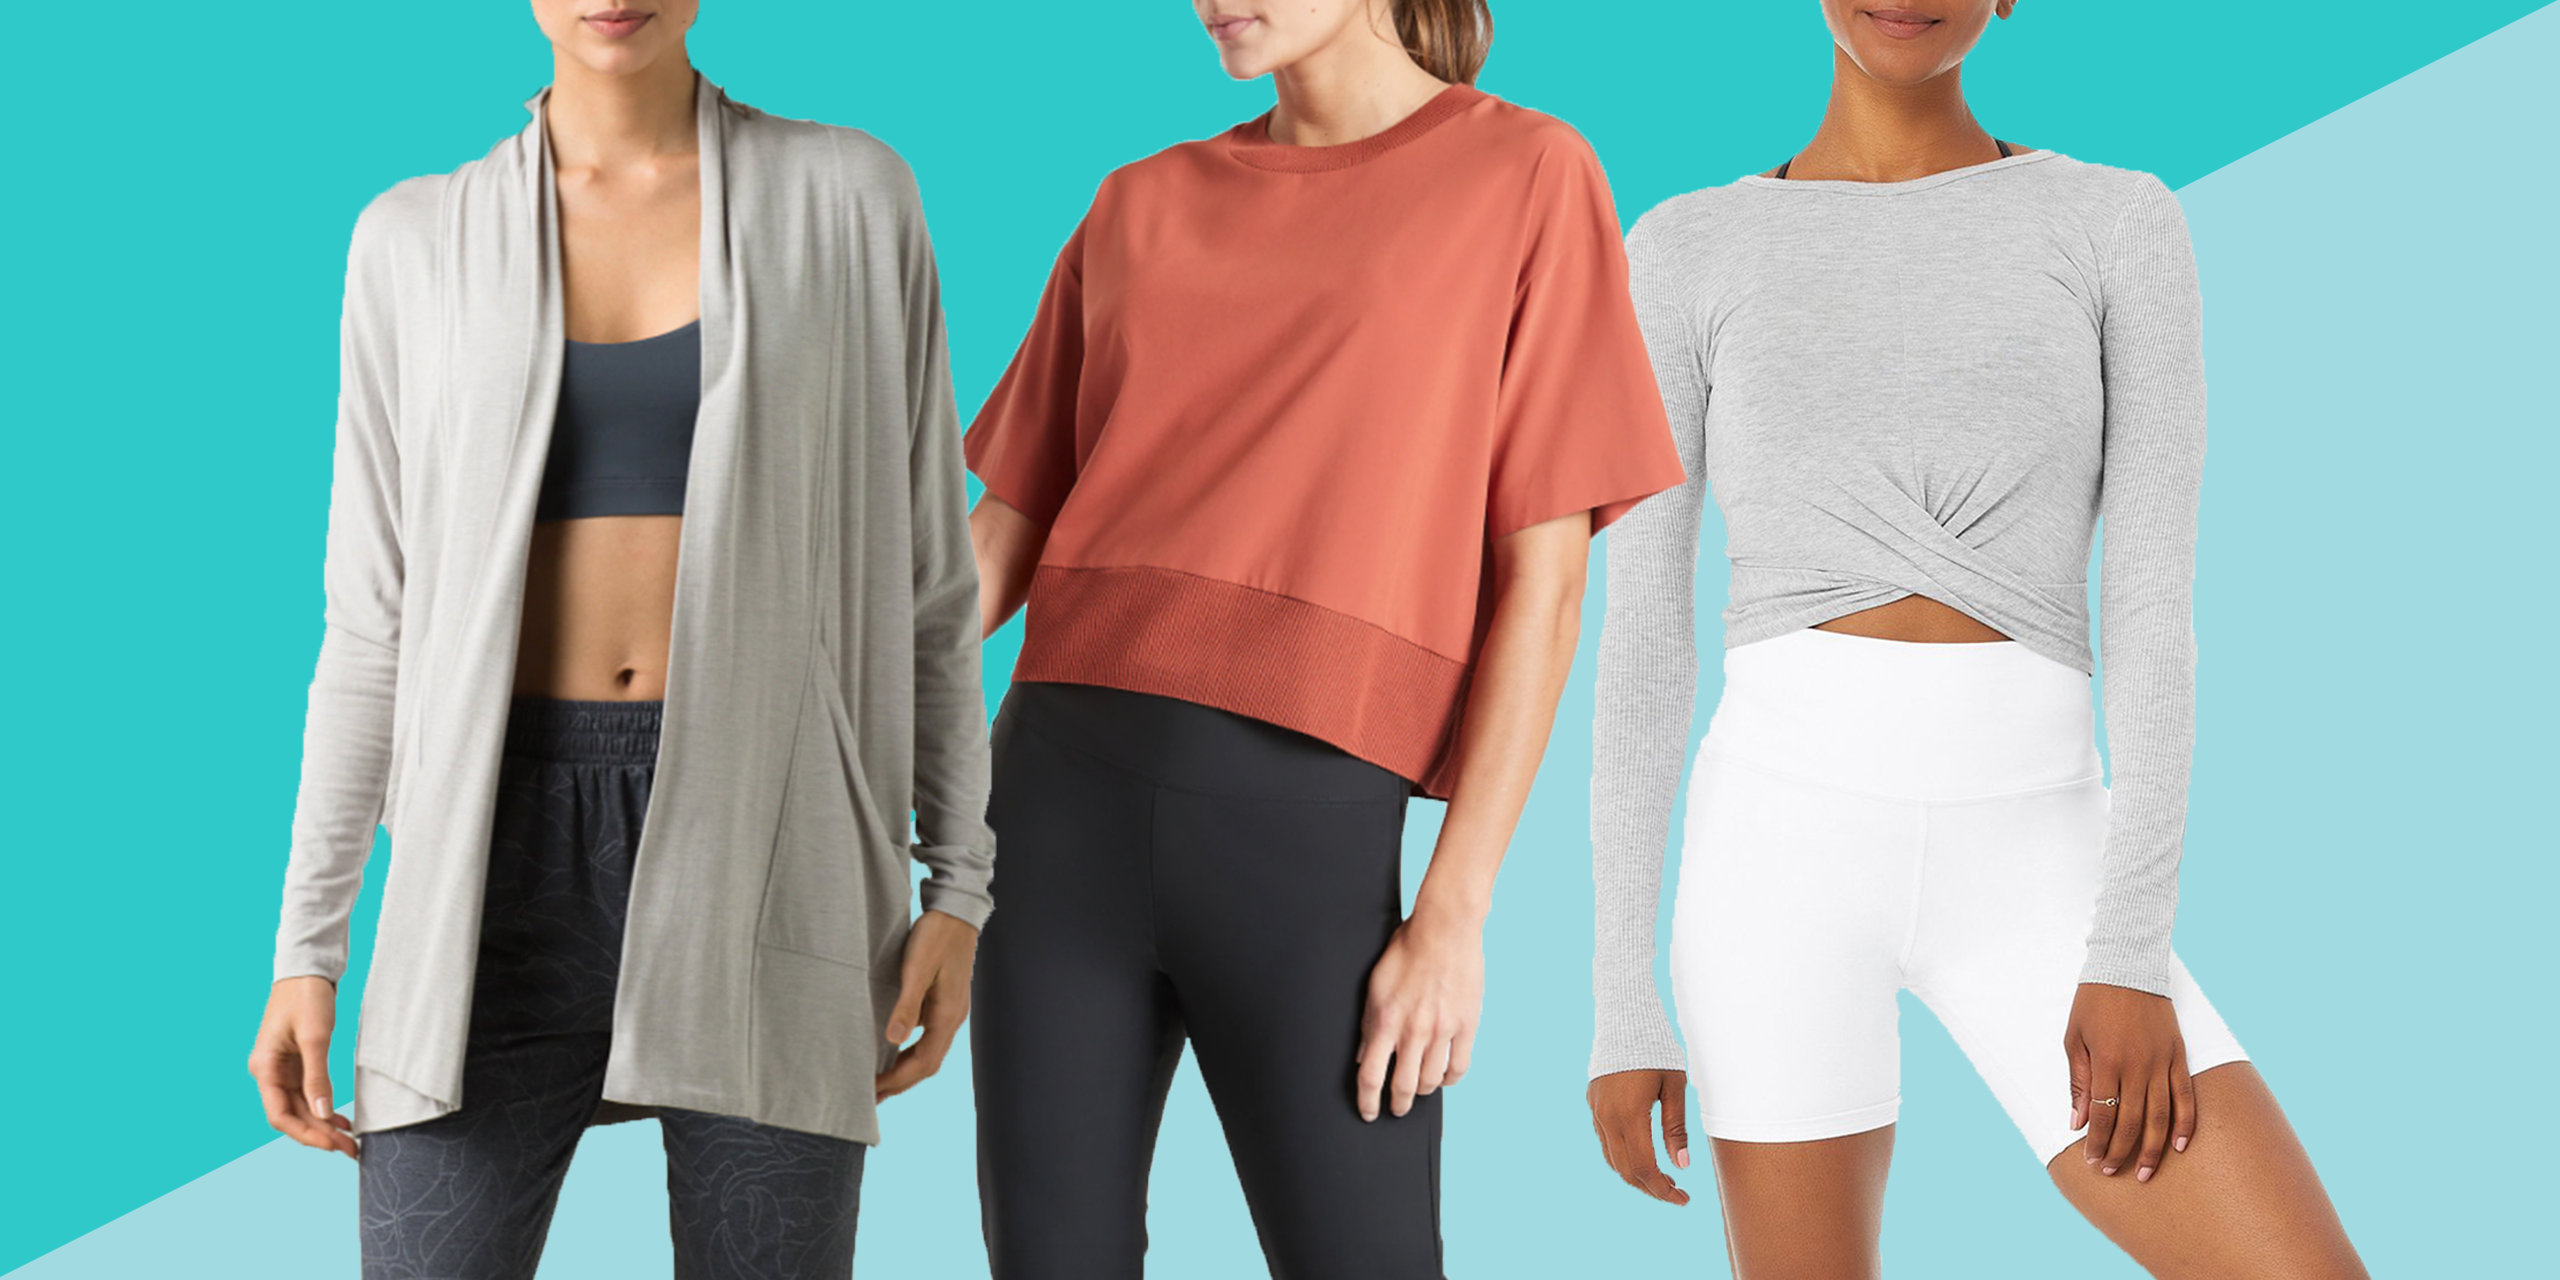 10 Athleisure Outfits You Can Wear For Any Daytime Activity - Society19